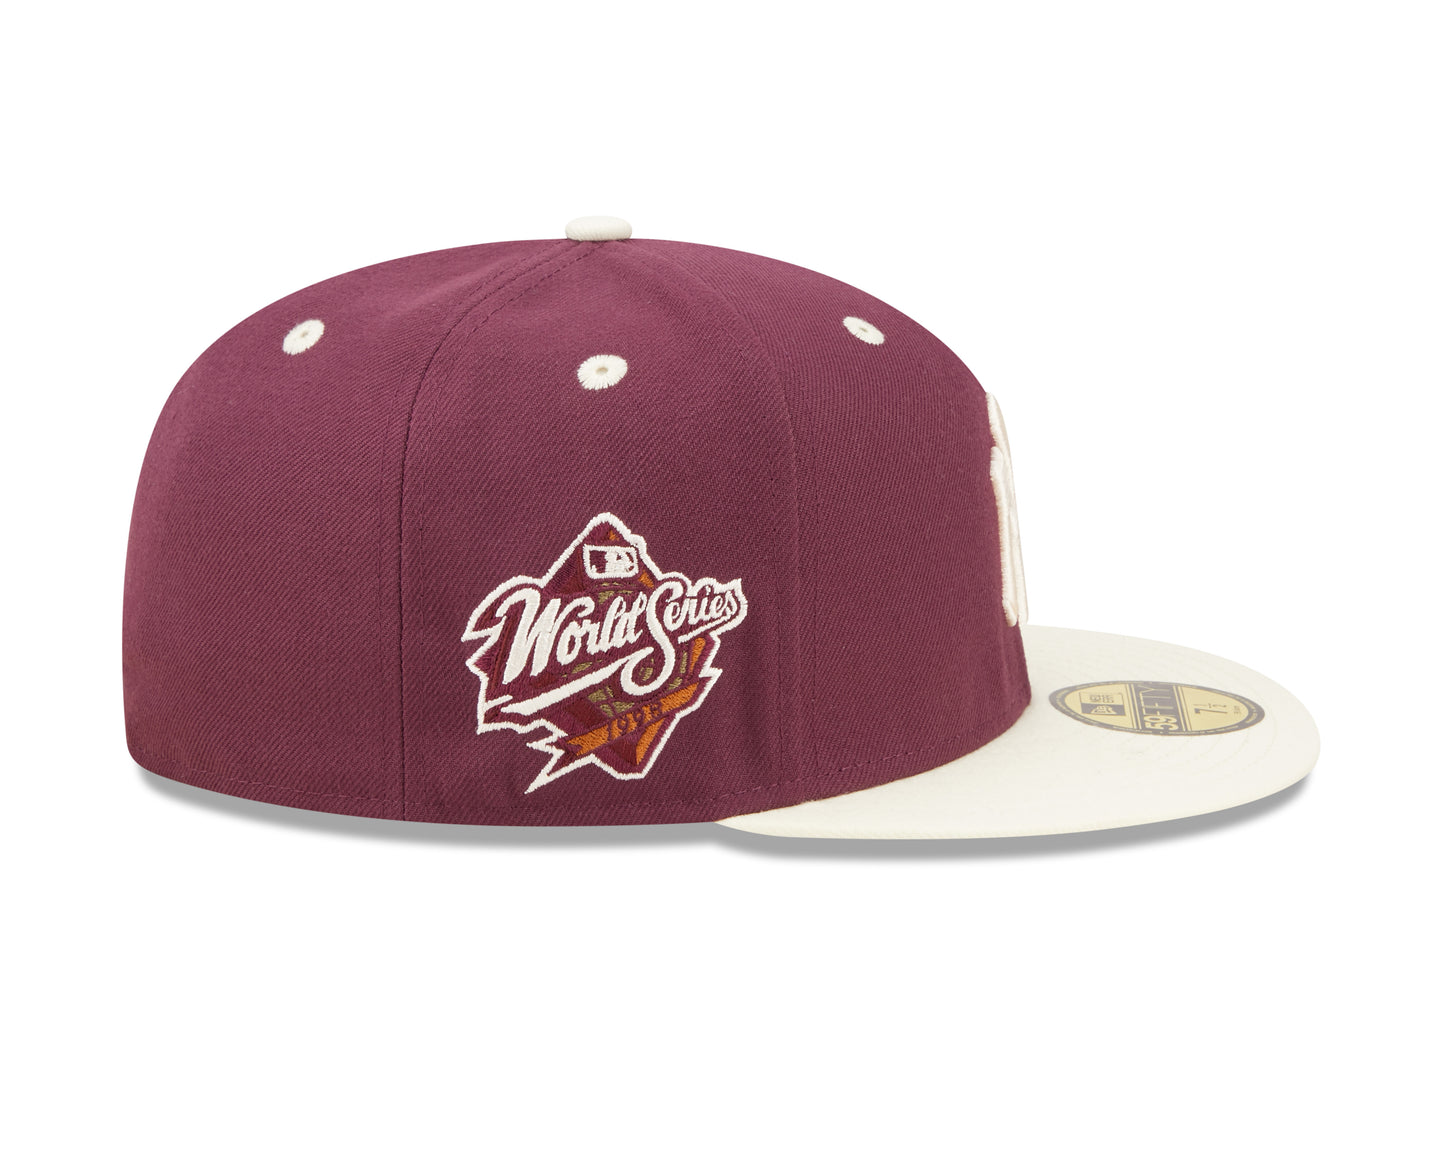 New York Yankees WS Trail Mix 59Fifty Fitted Cap - Maroon/White - Headz Up 